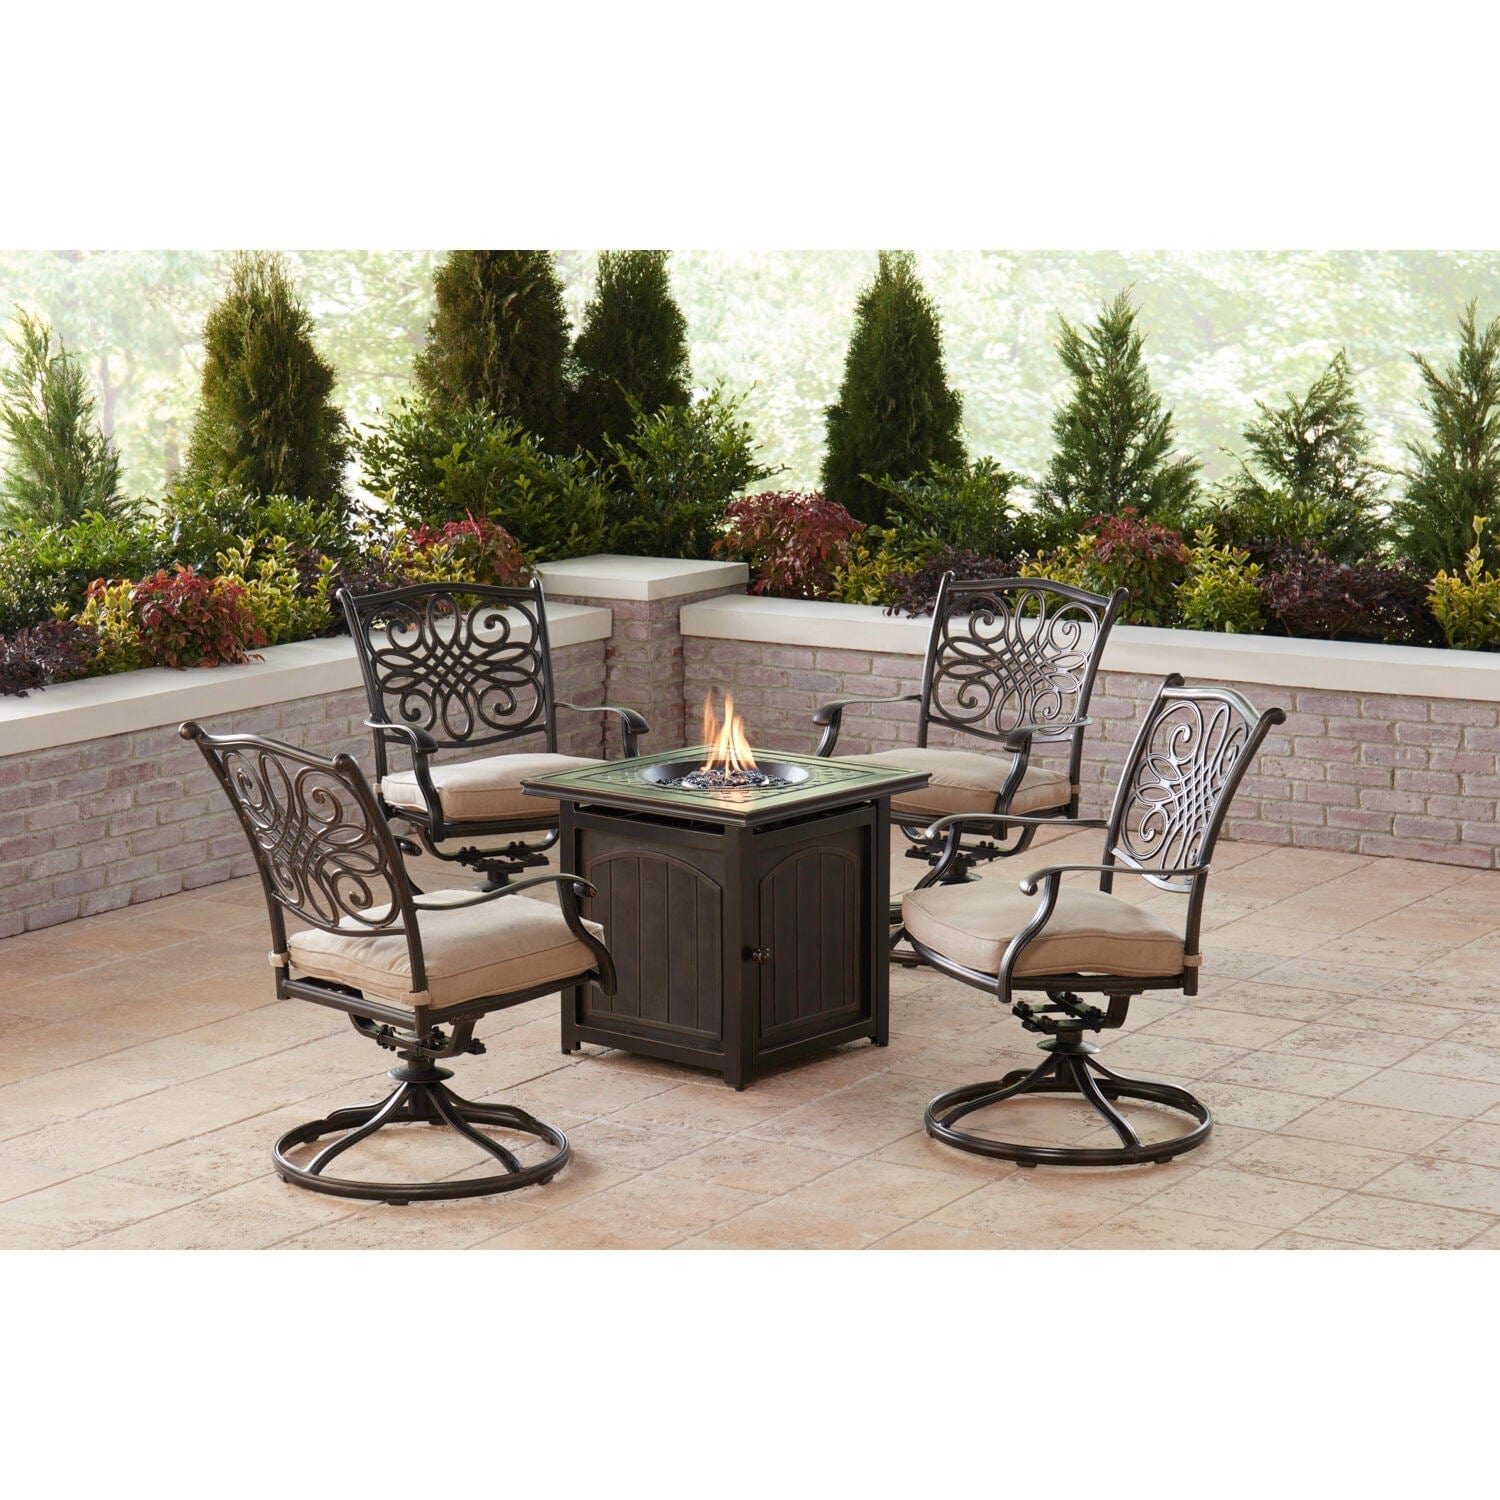 Hanover Fire Pit Chat Set Hanover - Traditions 5-Piece Aluminium Frame Fire Pit Chat Set in Natural Oat with 4 Swivel Rockers and a 26-In. Square Fire Pit Table |  TRAD5PCSWFPSQ-TAN